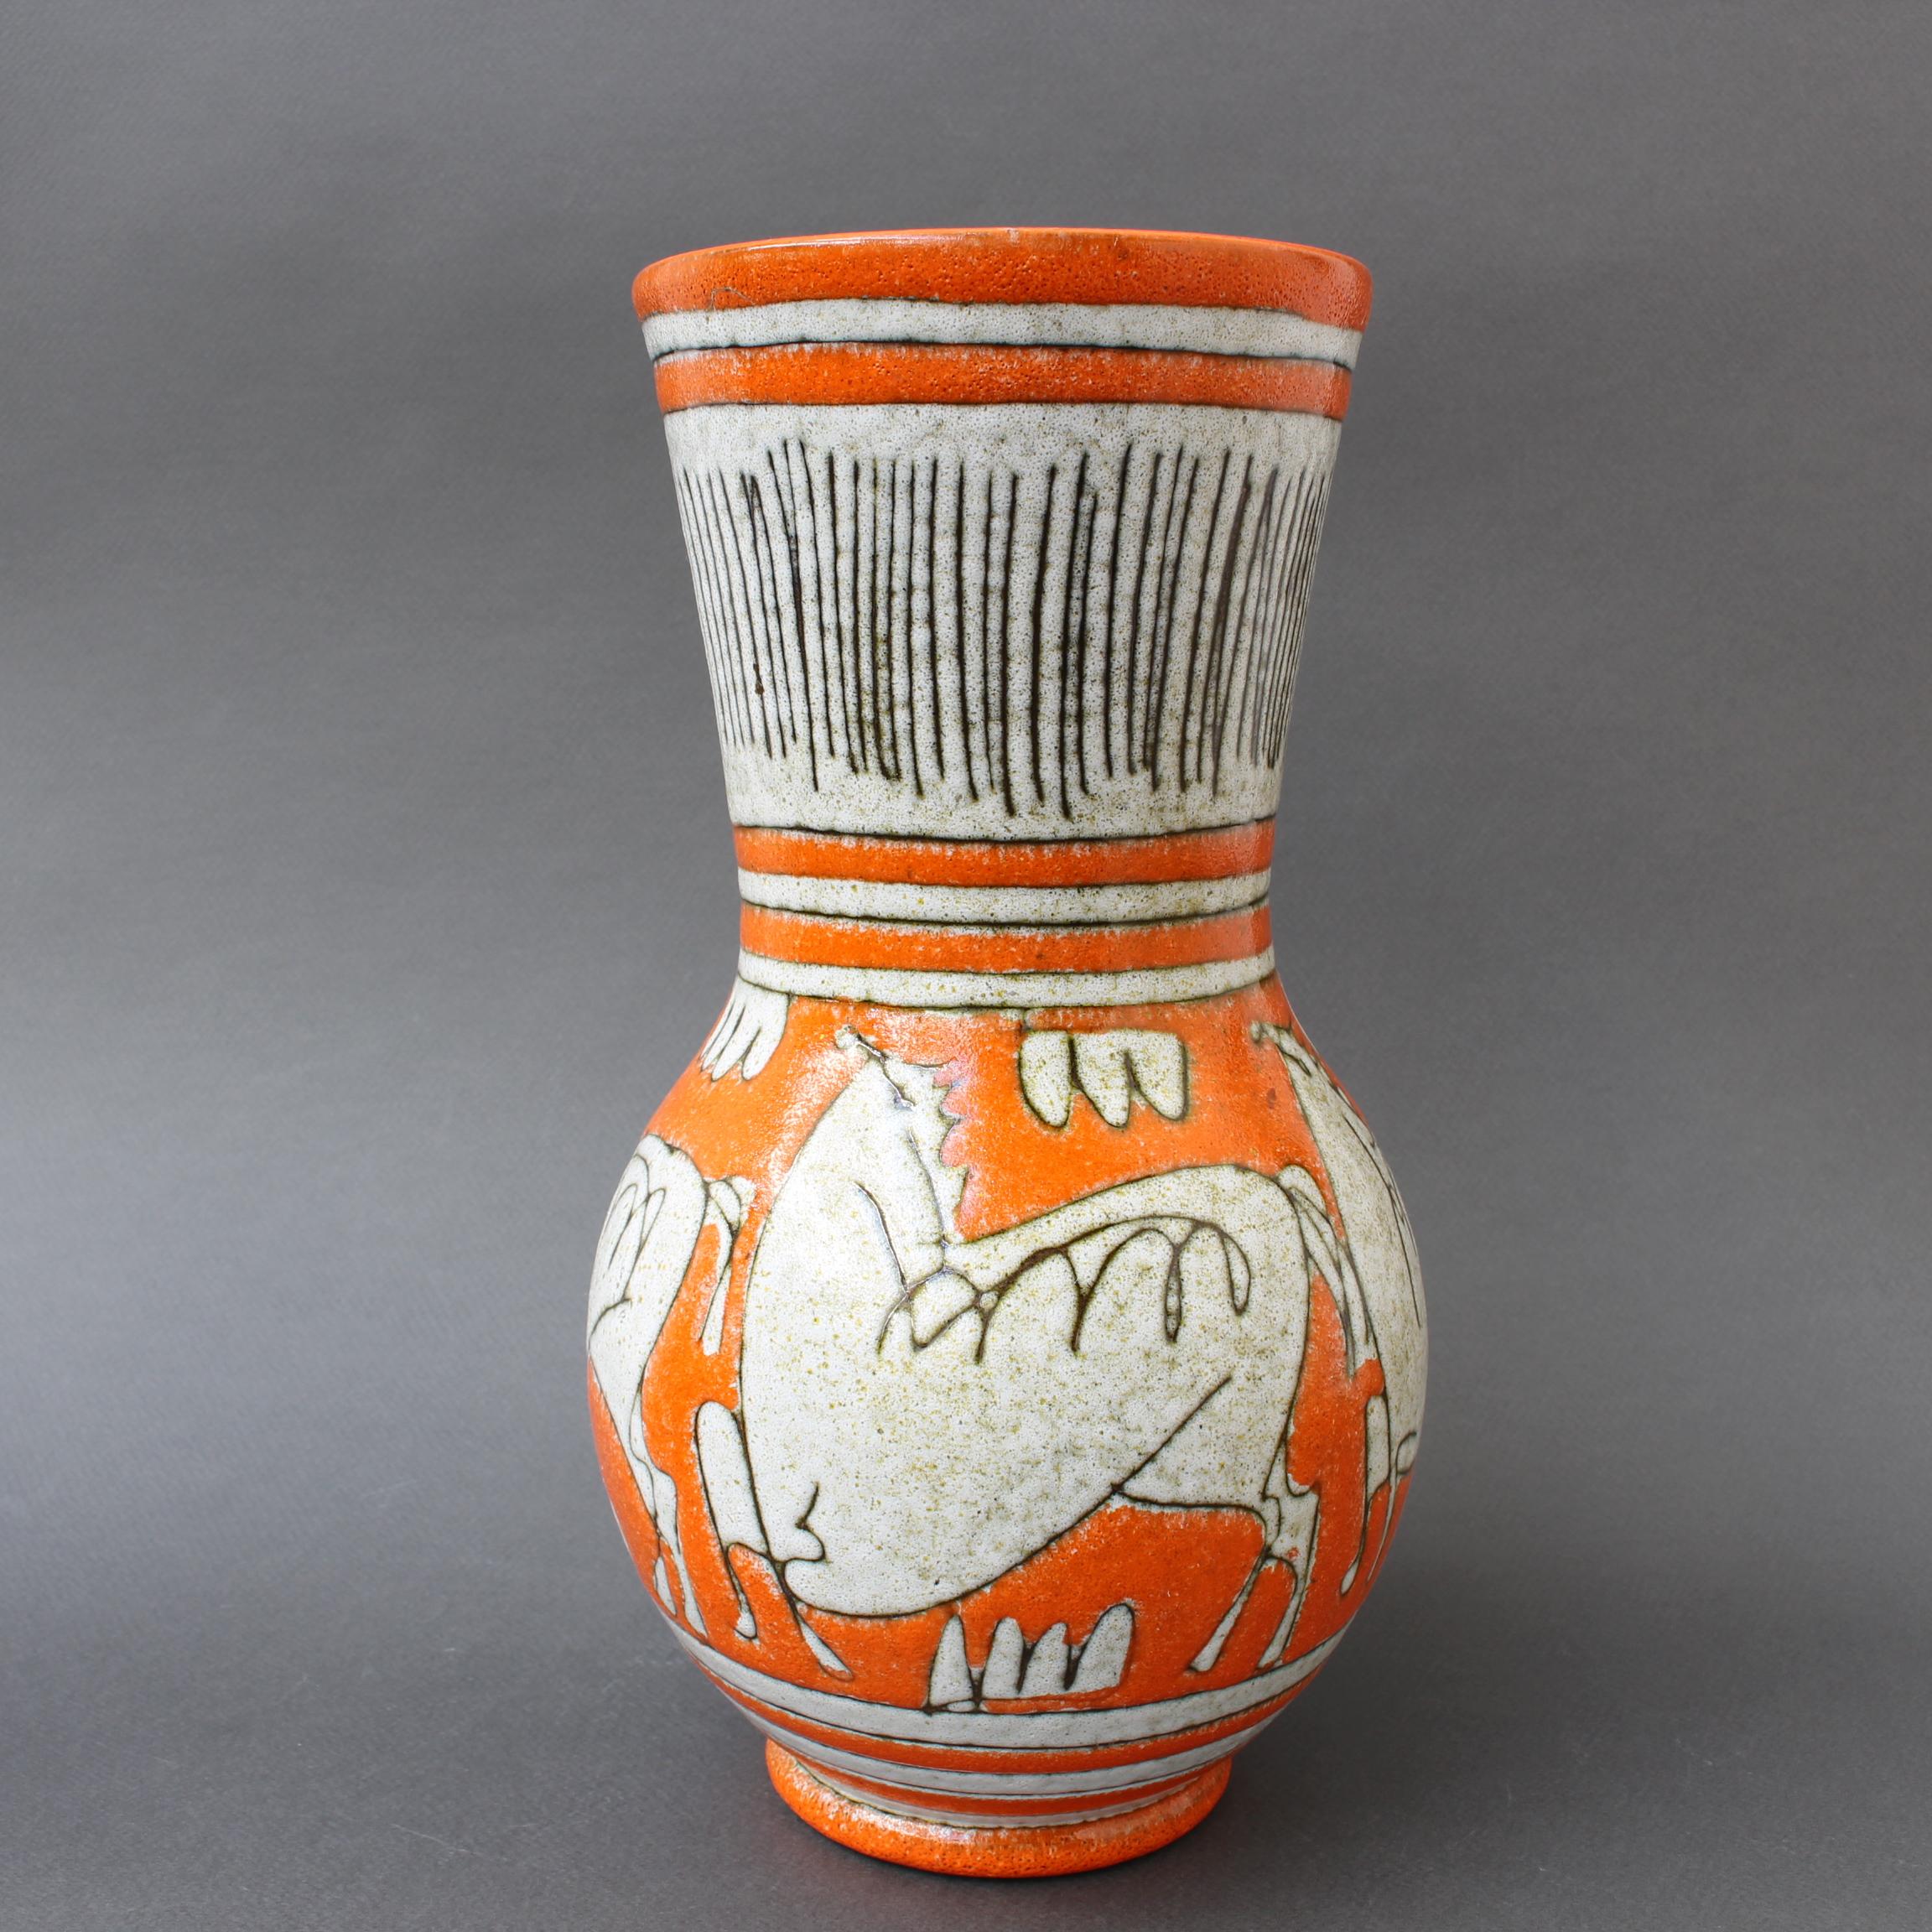 Midcentury Italian ceramic decorative vase by Fratelli Fanciullacci (circa 1960s). Vibrant orange, textural decor, primeval animals suggestive of cave drawings and an elegant form combine to create a stunning decorative vase. It will certainly